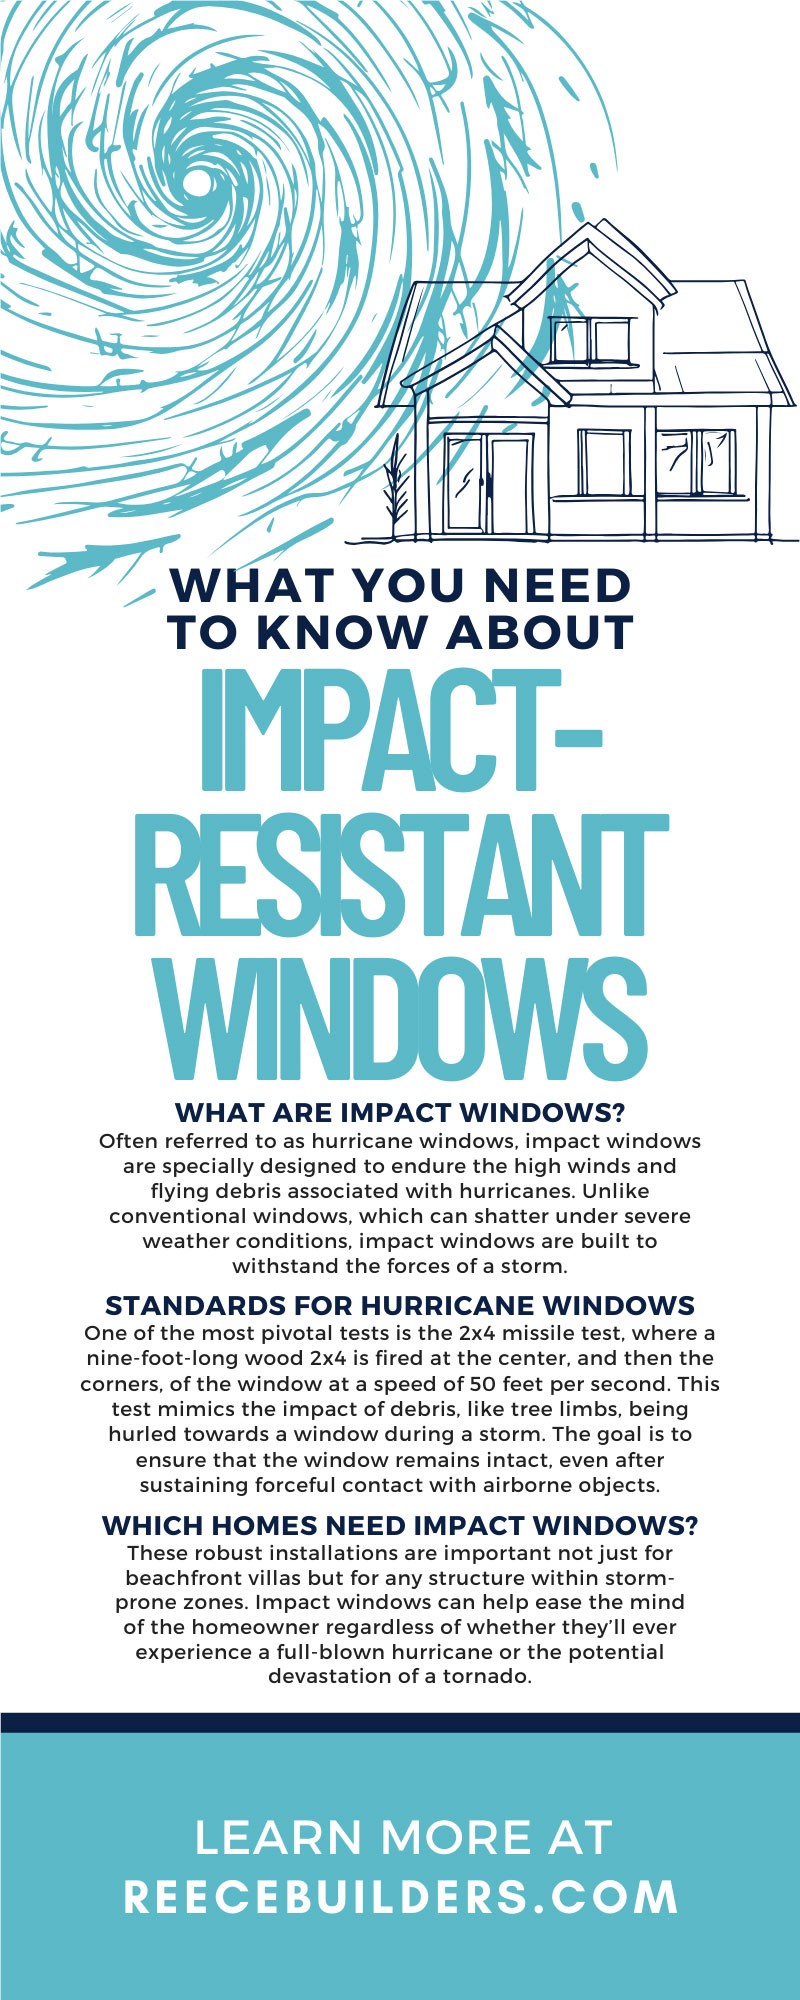 What You Need To Know About Impact-Resistant Windows